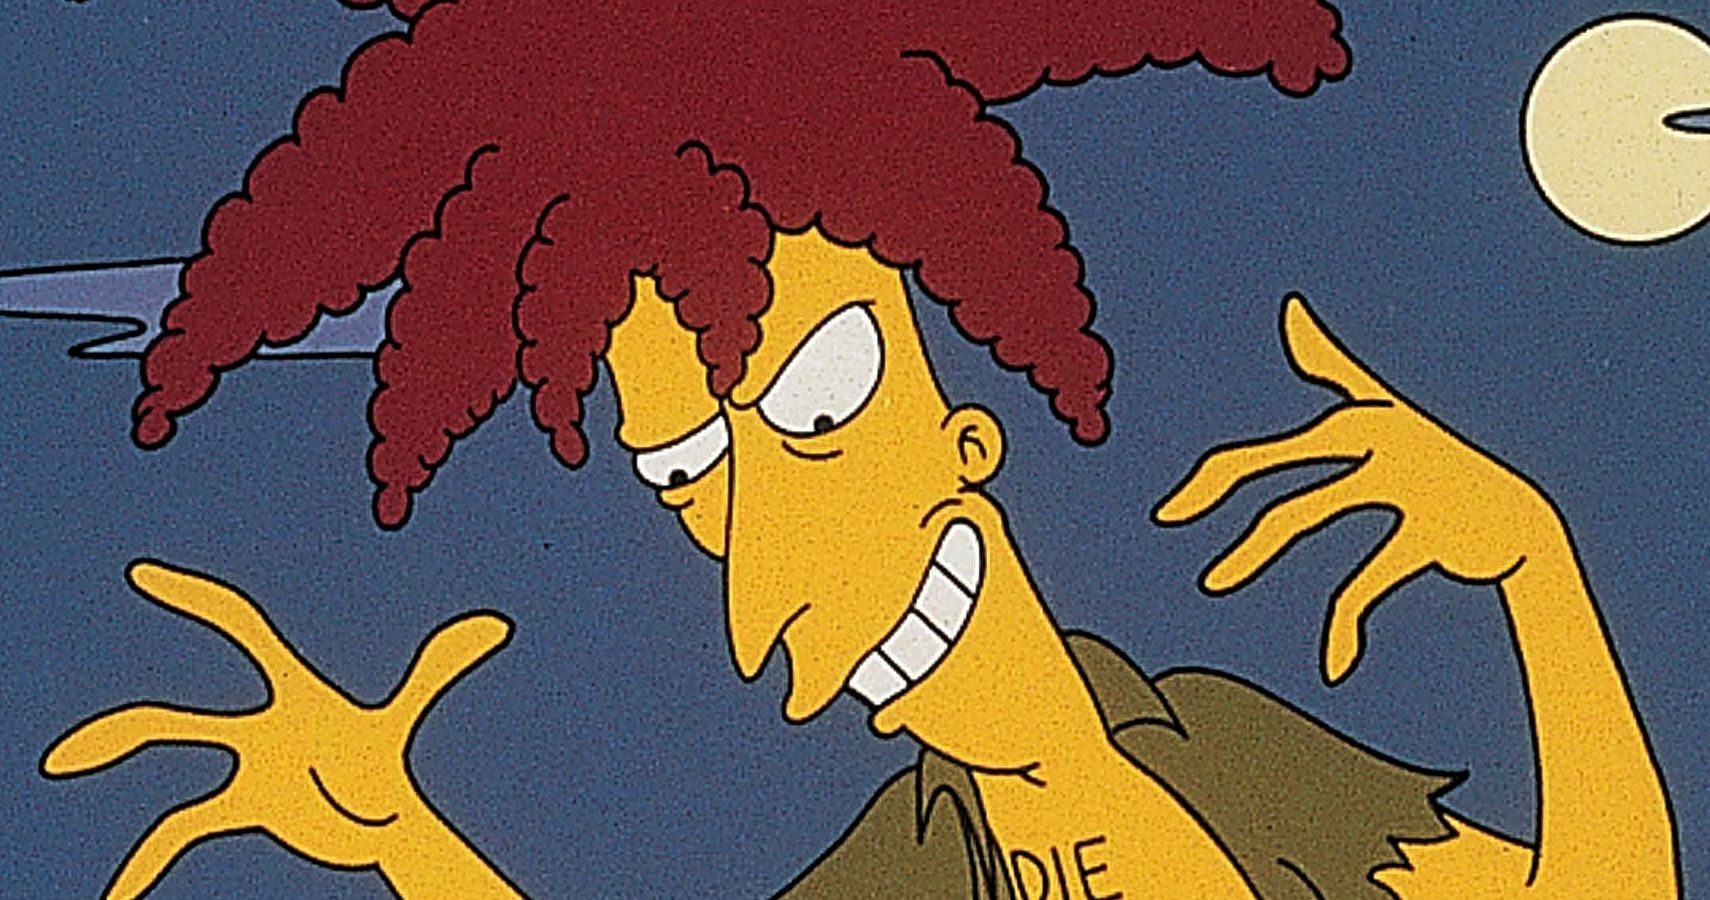 The Simpsons 10 Best Villains In The Shows History - vrogue.co